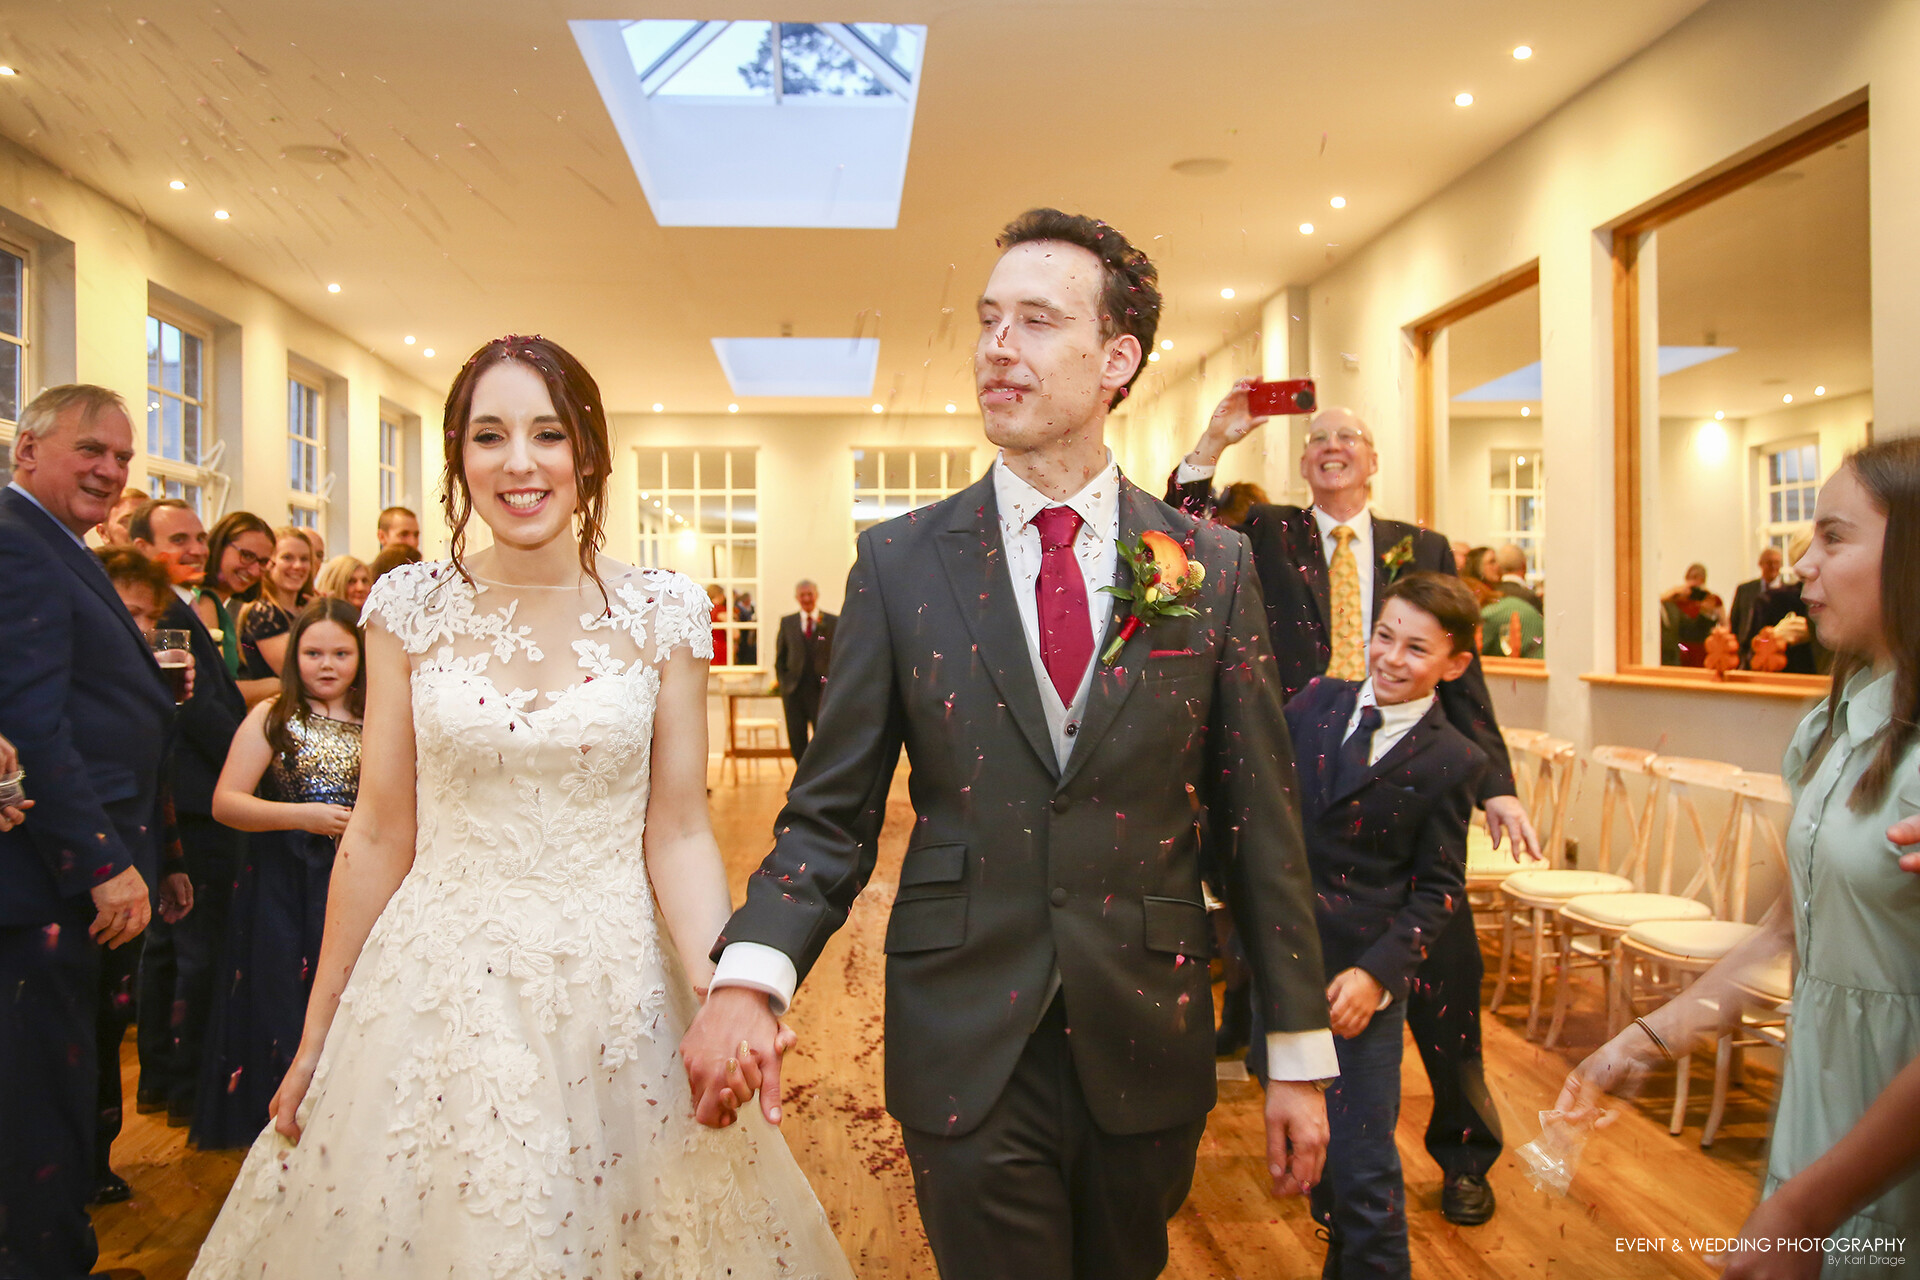 The Bride & Groom walk towards the camera at Bredenbury Court Barns as their guests throw confetti